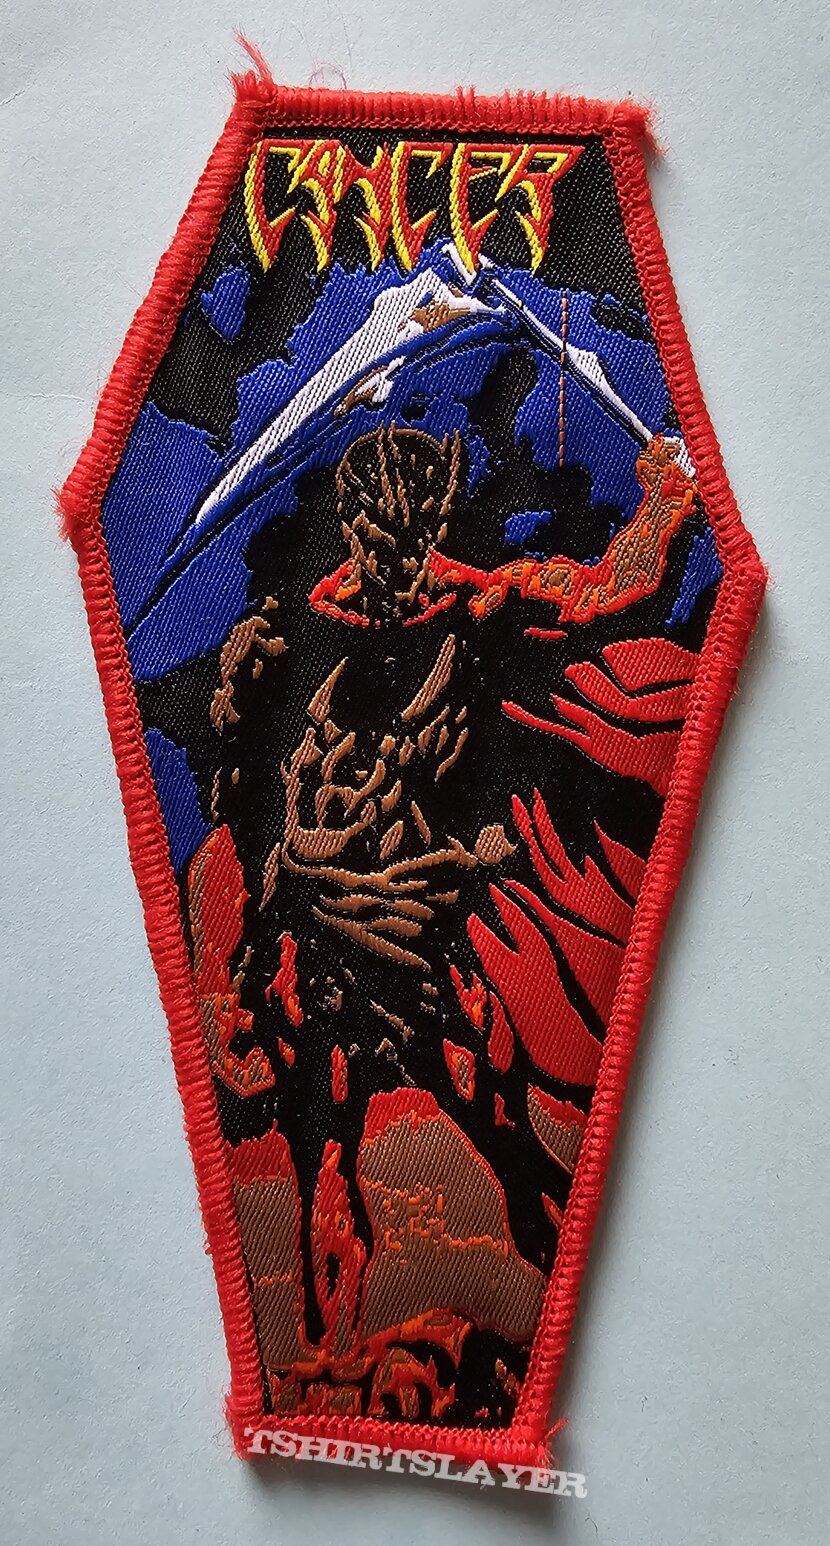 Cancer Death Shall Rise Coffin Patch Red Border 